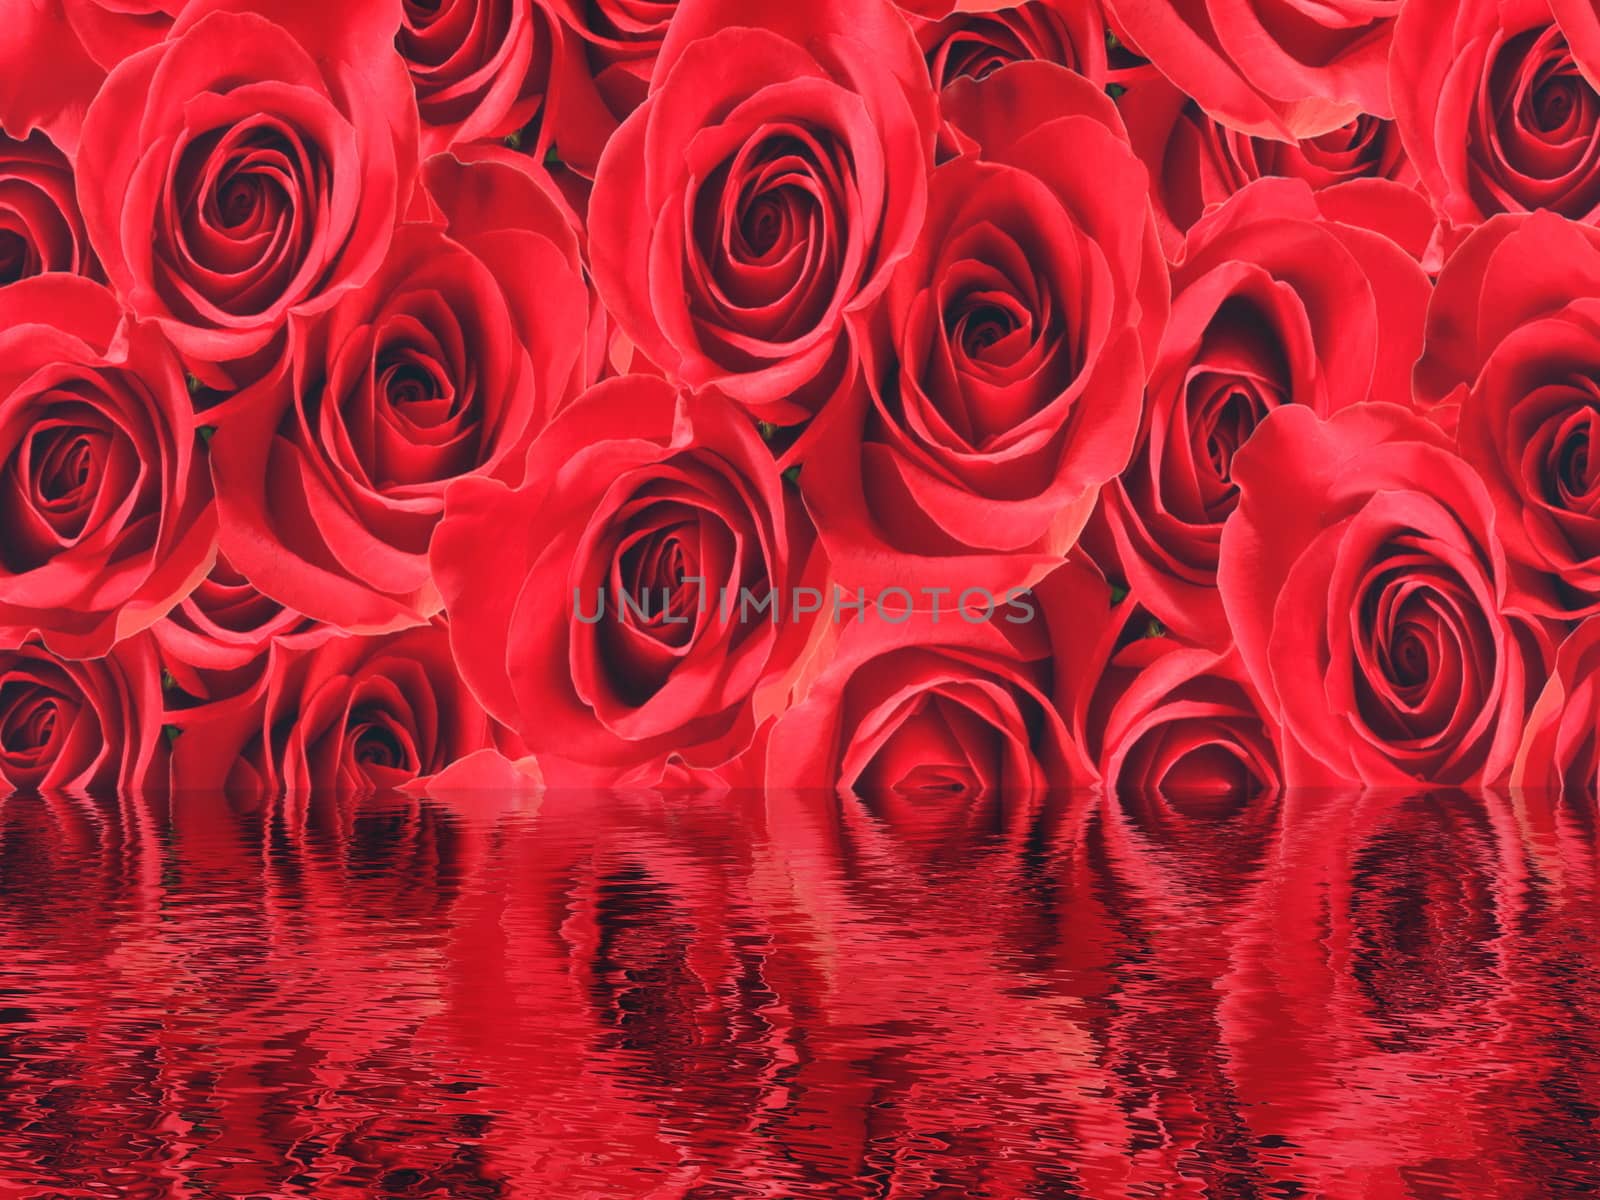 Red roses background by Elenaphotos21